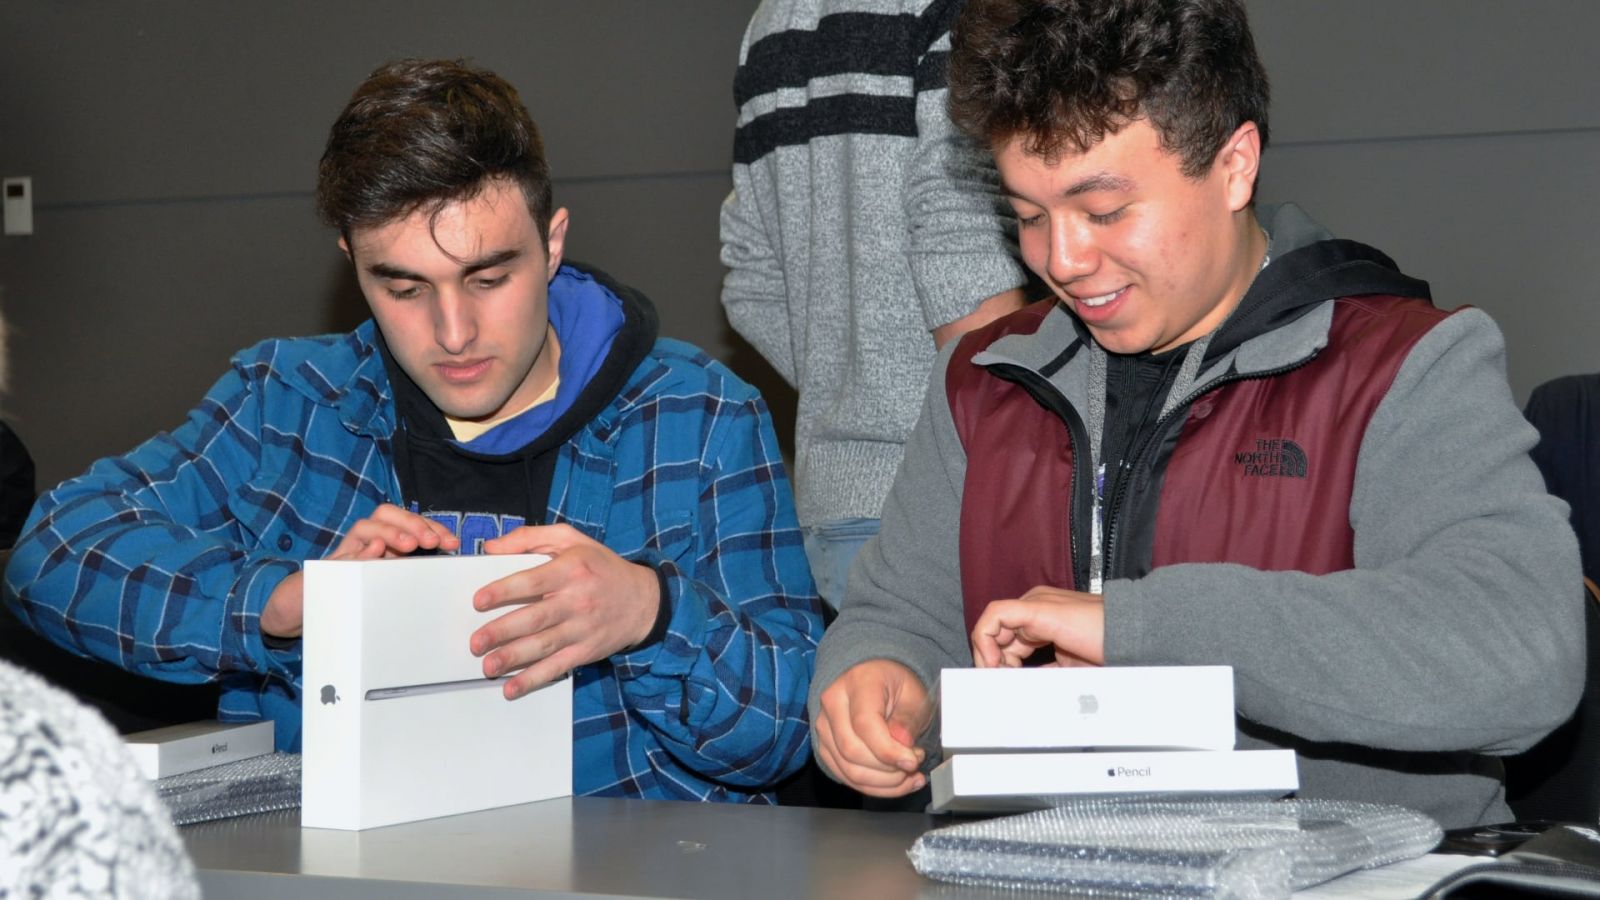 Aviation technology students each unbox their Electronic Purdue Bag's iPad and Apple Pencil